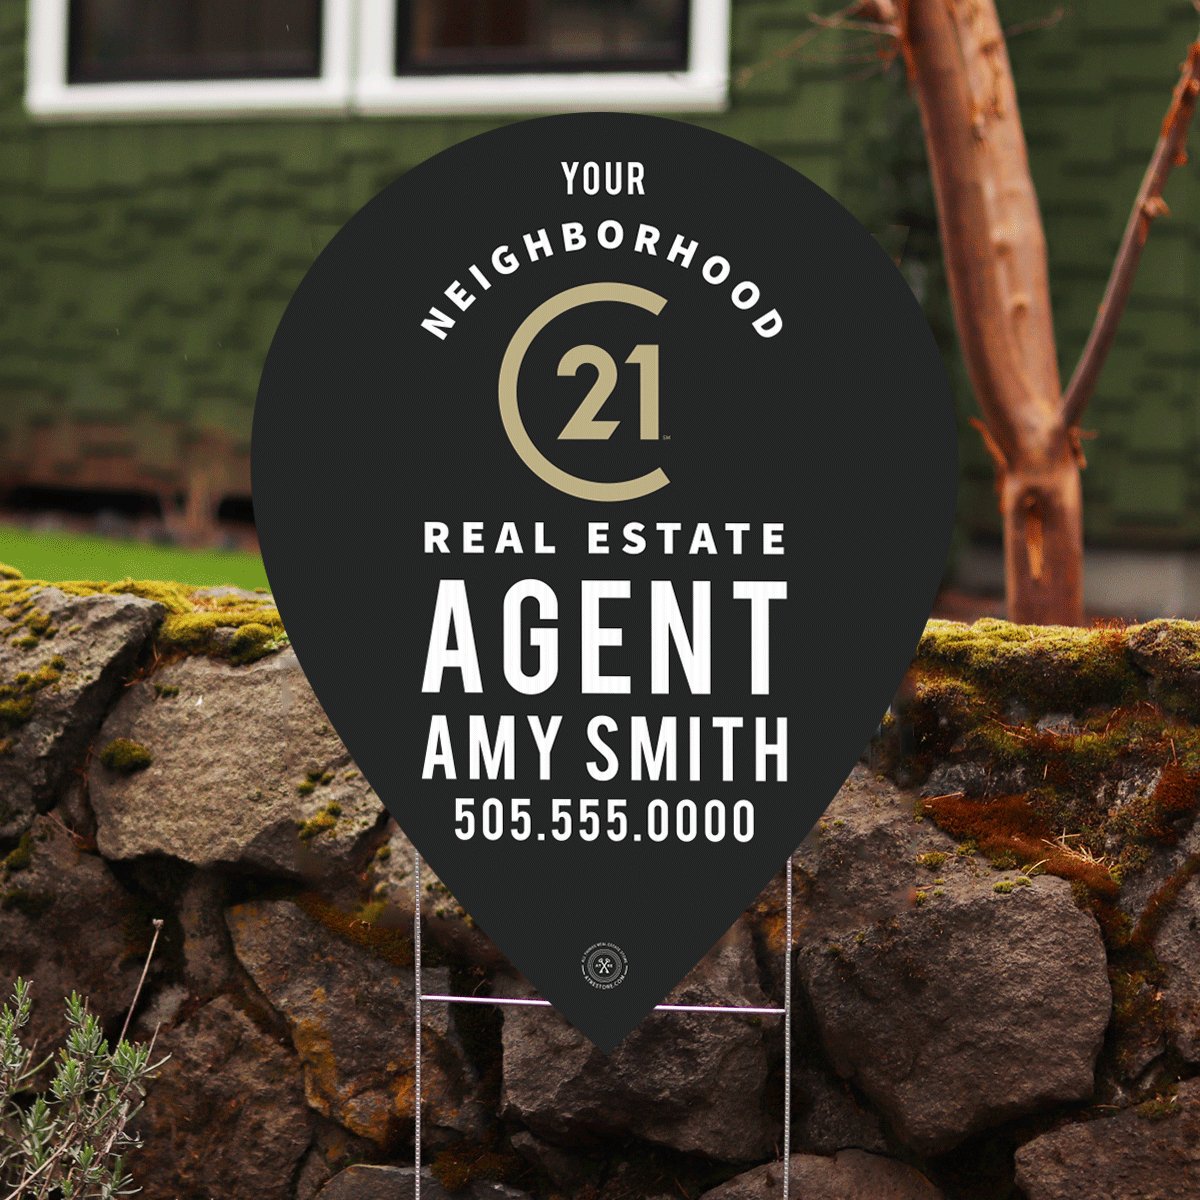 C21 - Personalized Neighborhood Agent Map Pin - All Things Real Estate